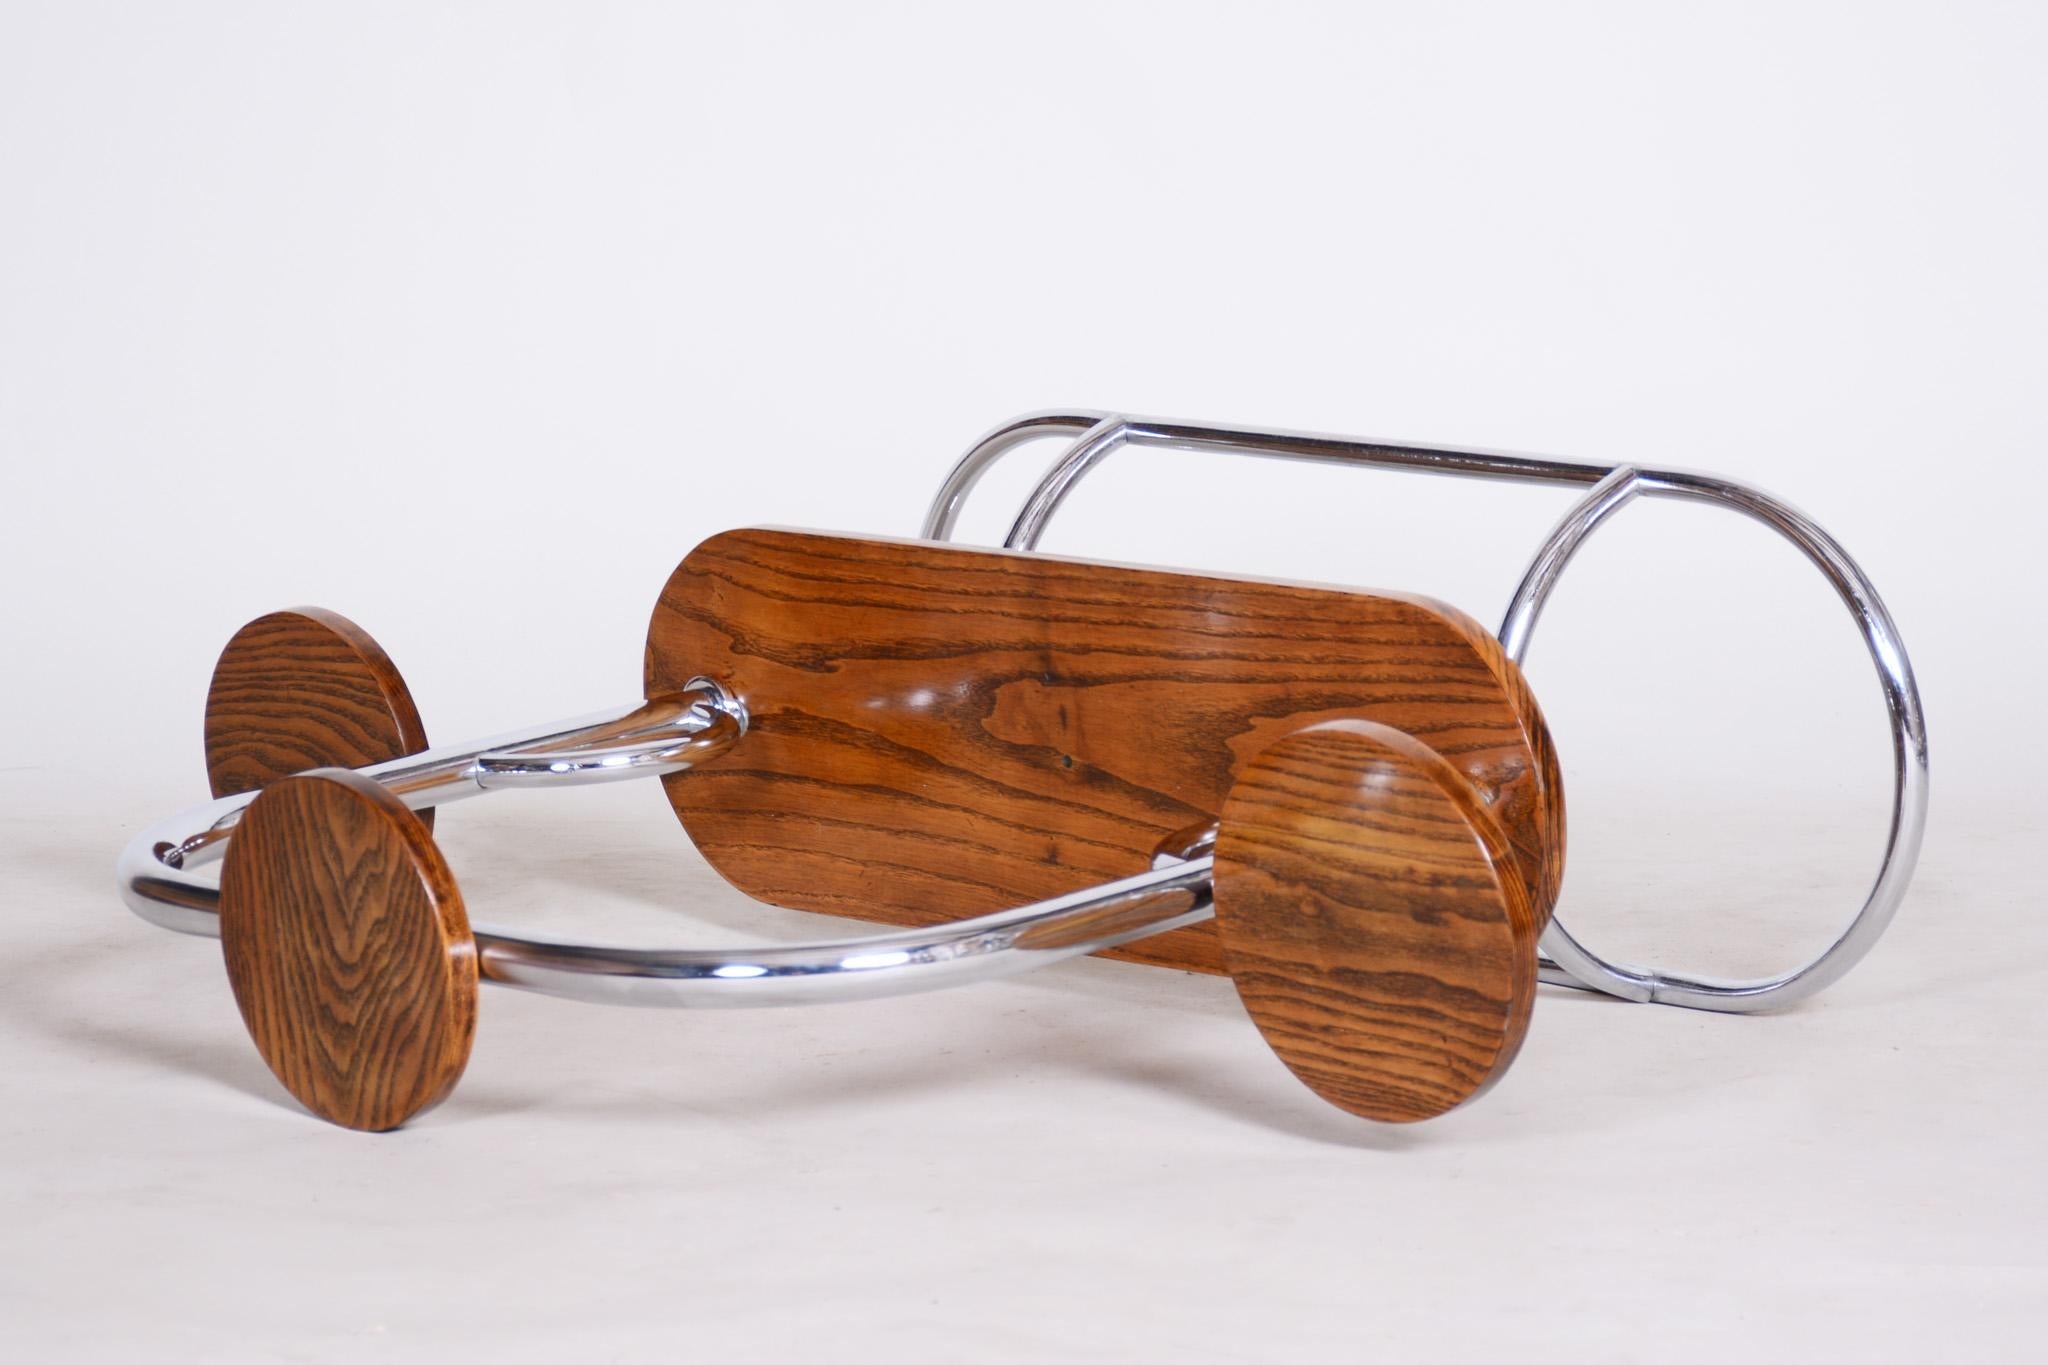 Czech Bauhaus Chrome Flower Stand Made Out of Oak, Lacquered, 1930s For Sale 6